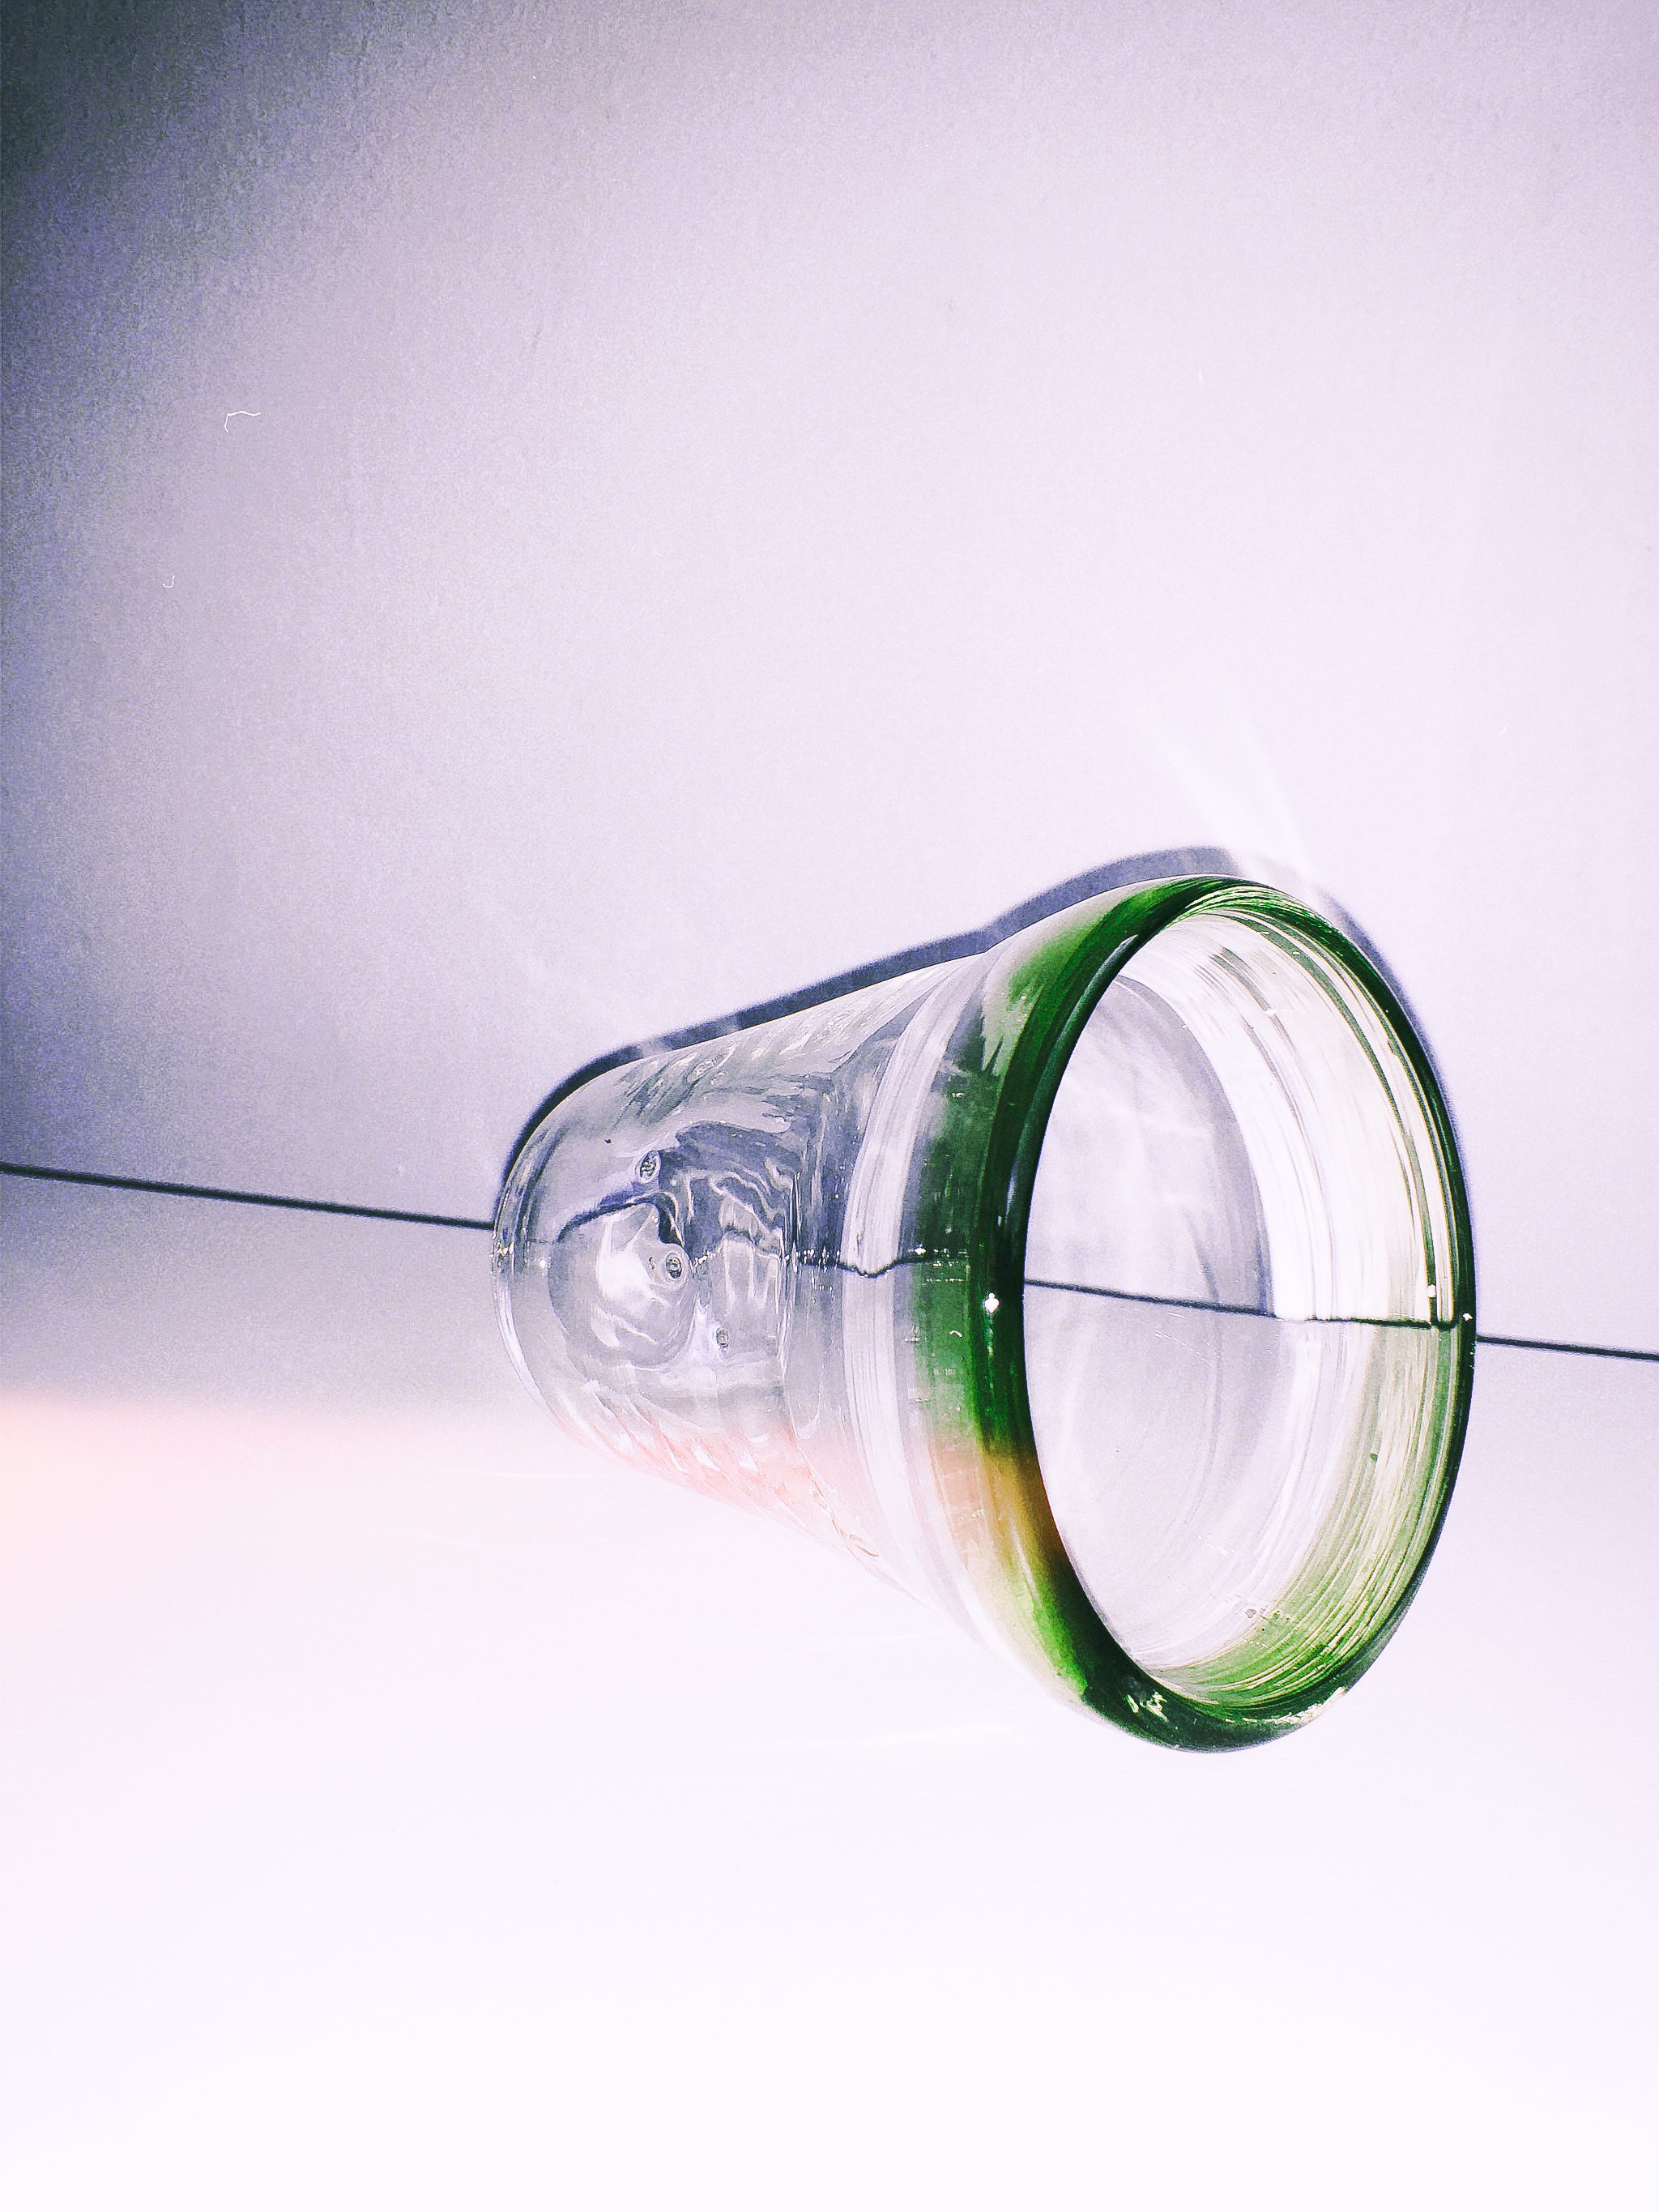 Water Glasses in Apple by PROSE Tabletop